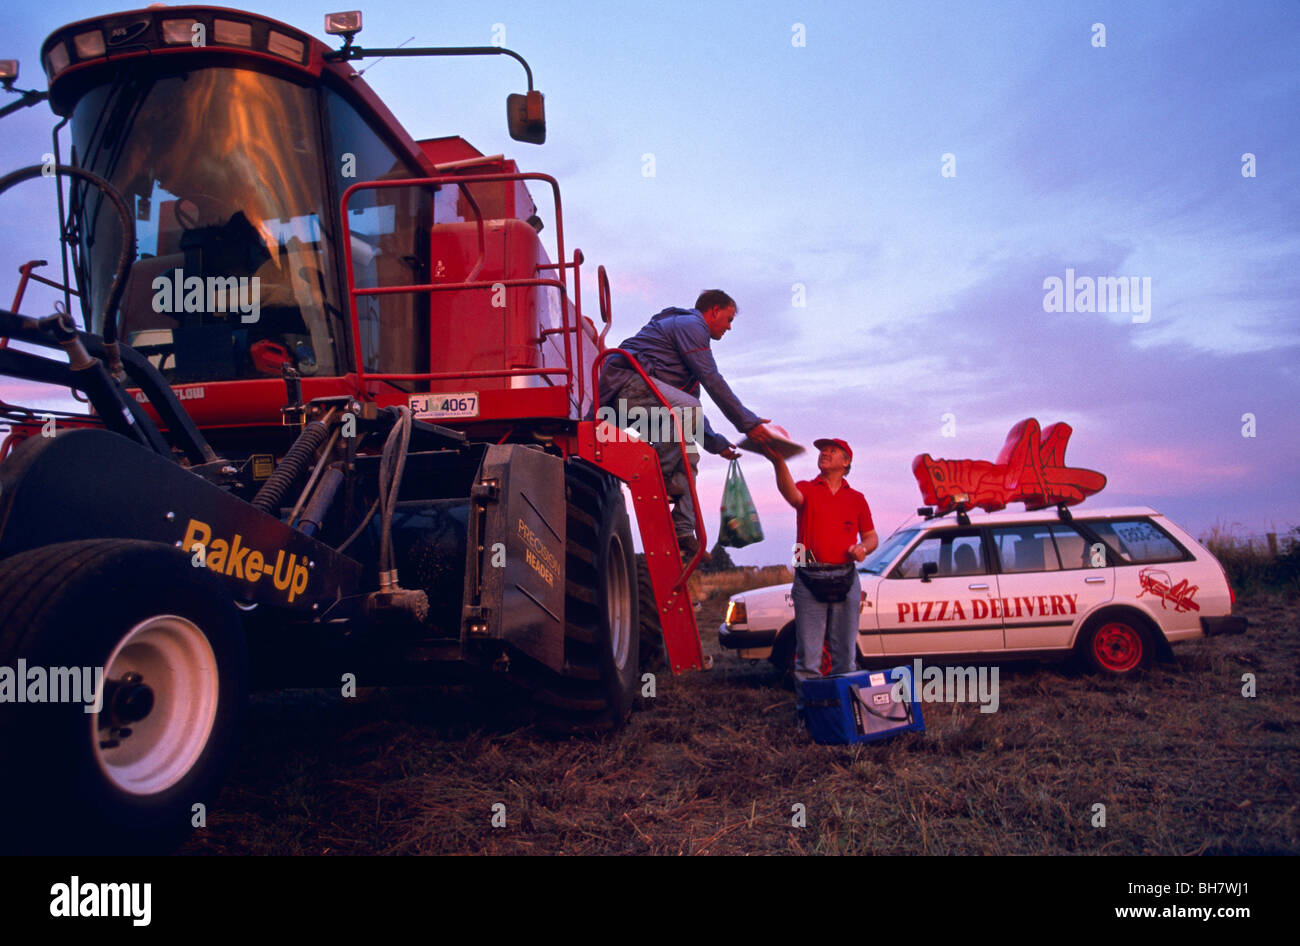 Pizza delivery and harvesting pyrethrum, Australia Stock Photo